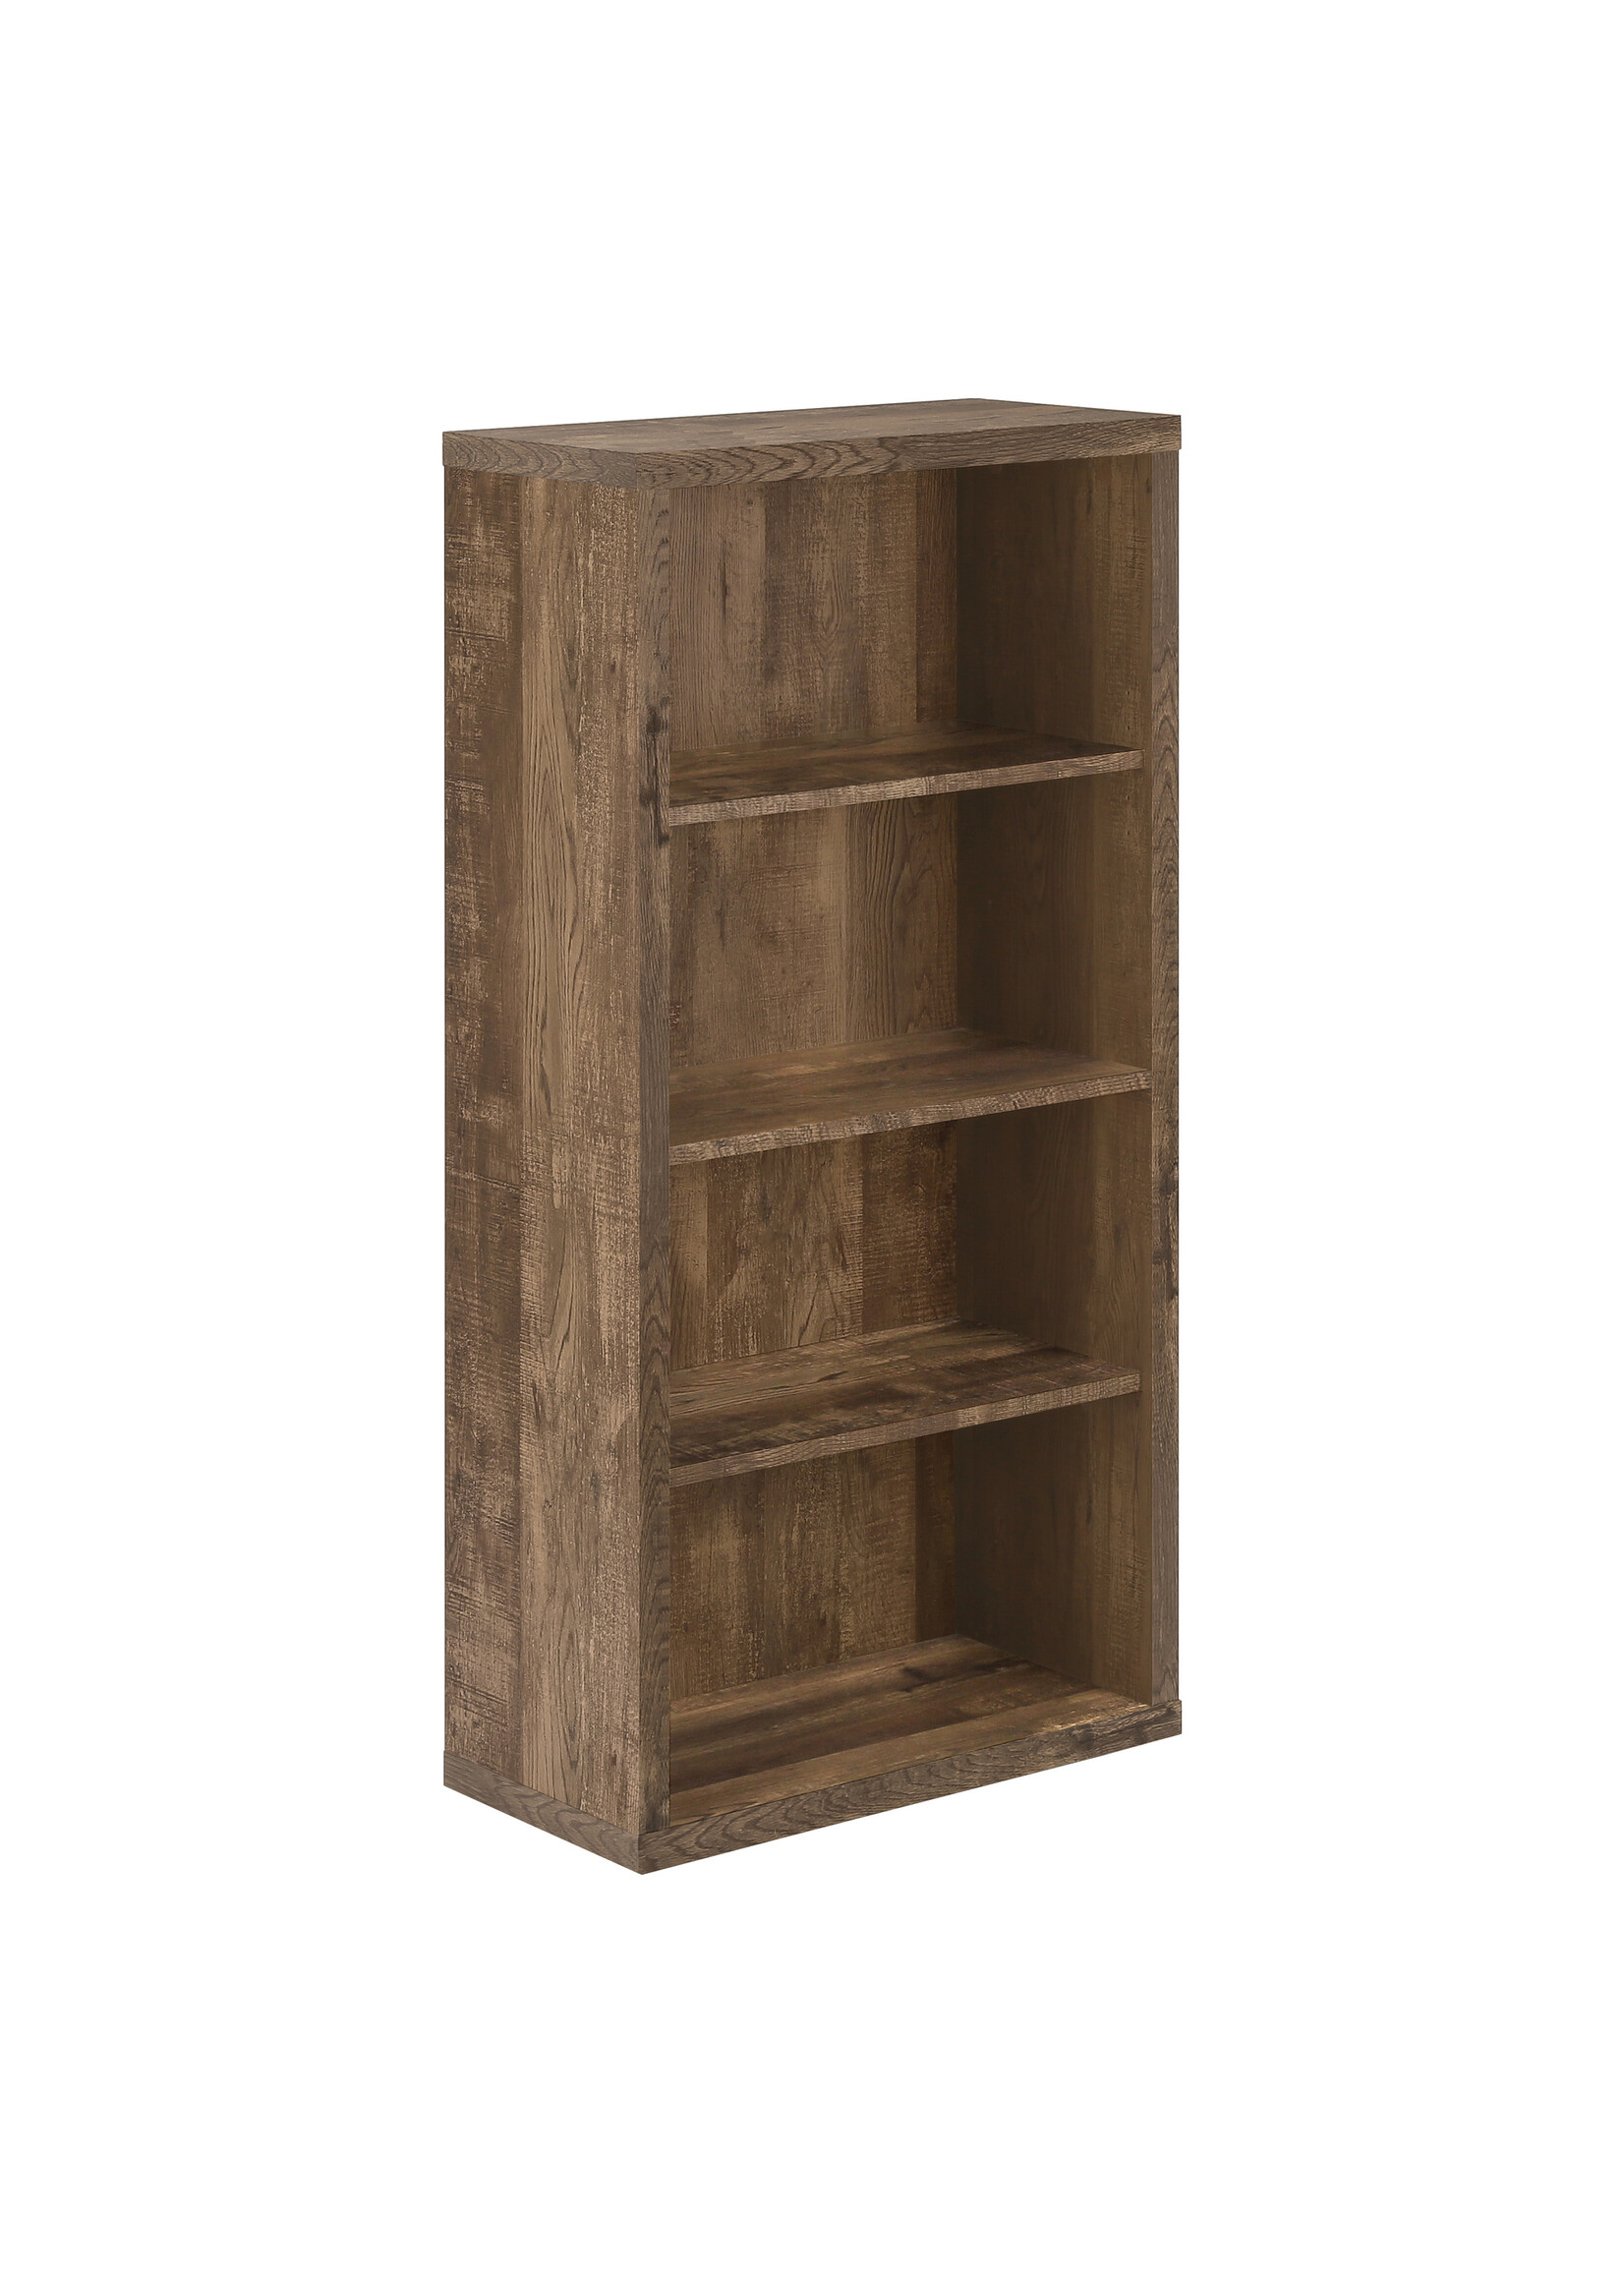 BOOKCASE 48"H BROWN RECLAIMED WOOD LOOK